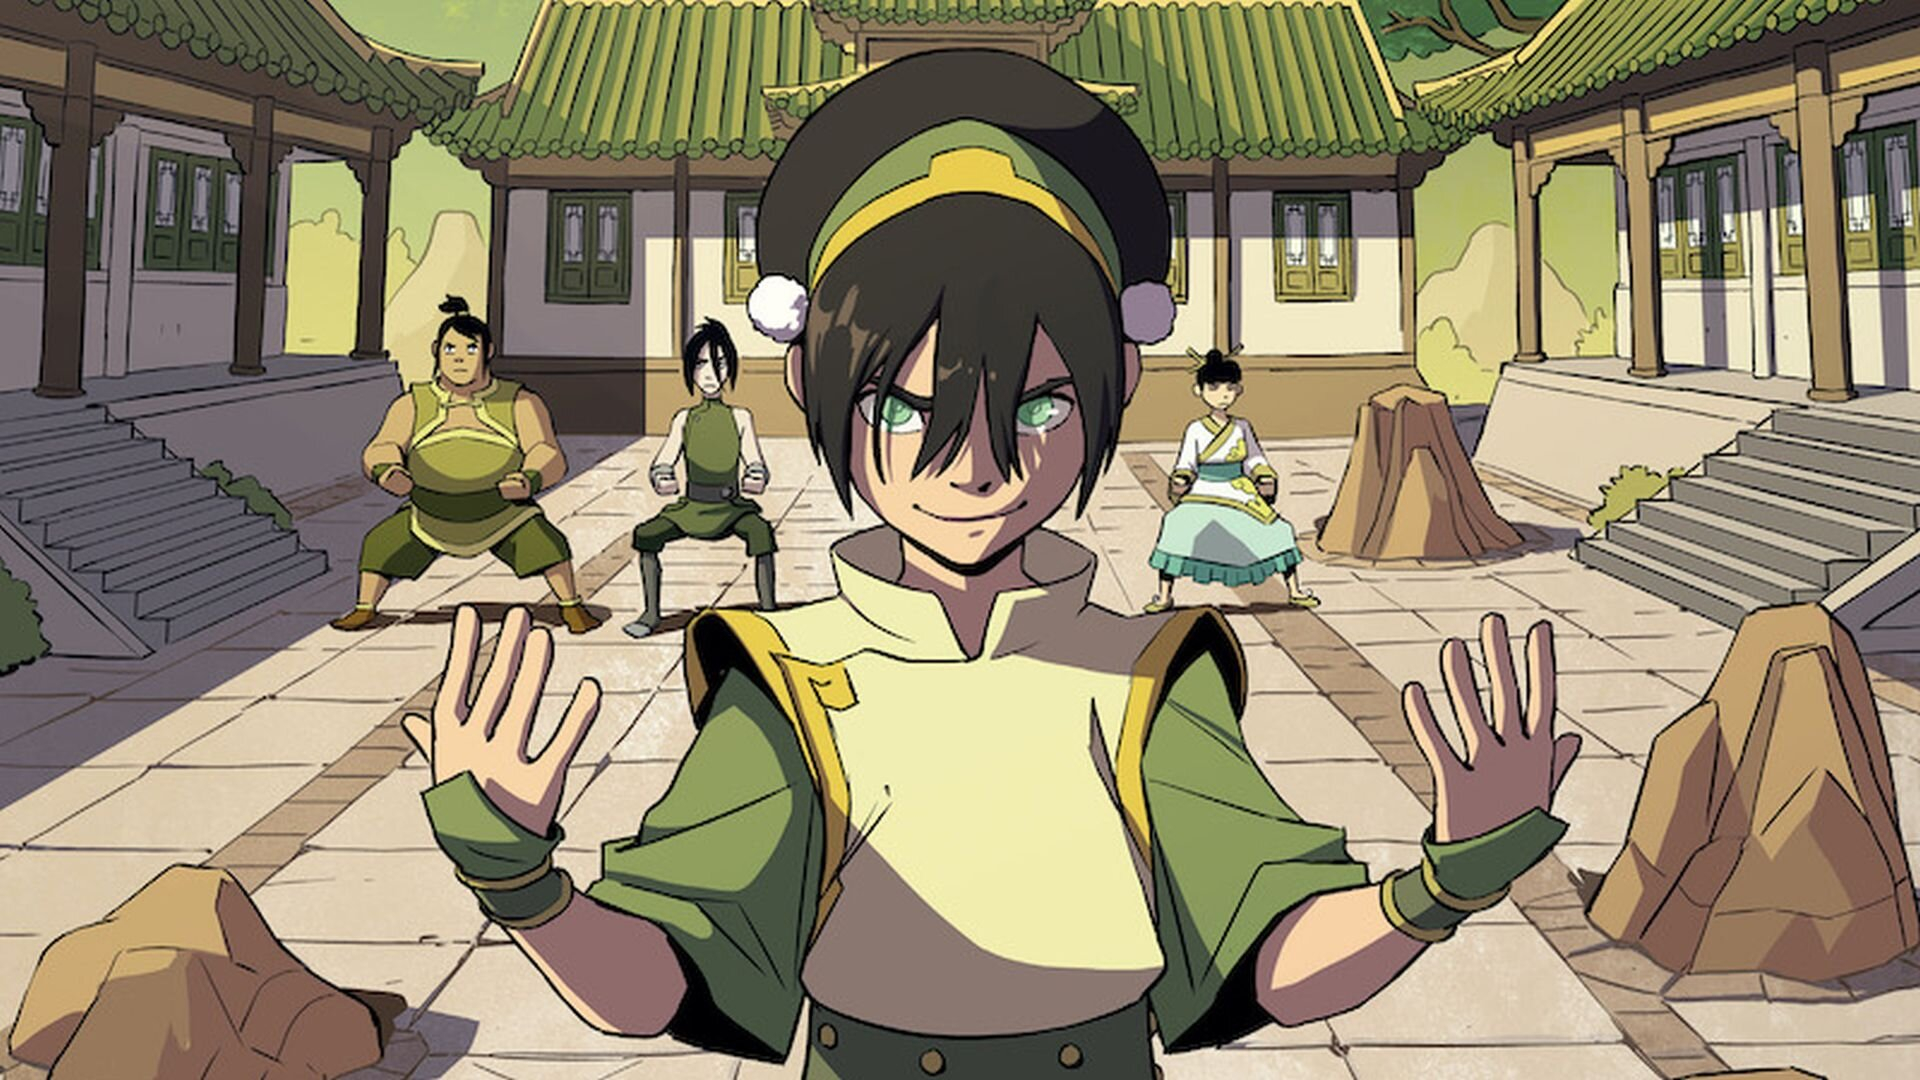 1920x1080 Toph Beifong Is Getting Her Own Graphic Novel Story in TOPH BEIFONG'S METALBENDING ACADEMY &acirc;&#128;&#148; GeekTyrant